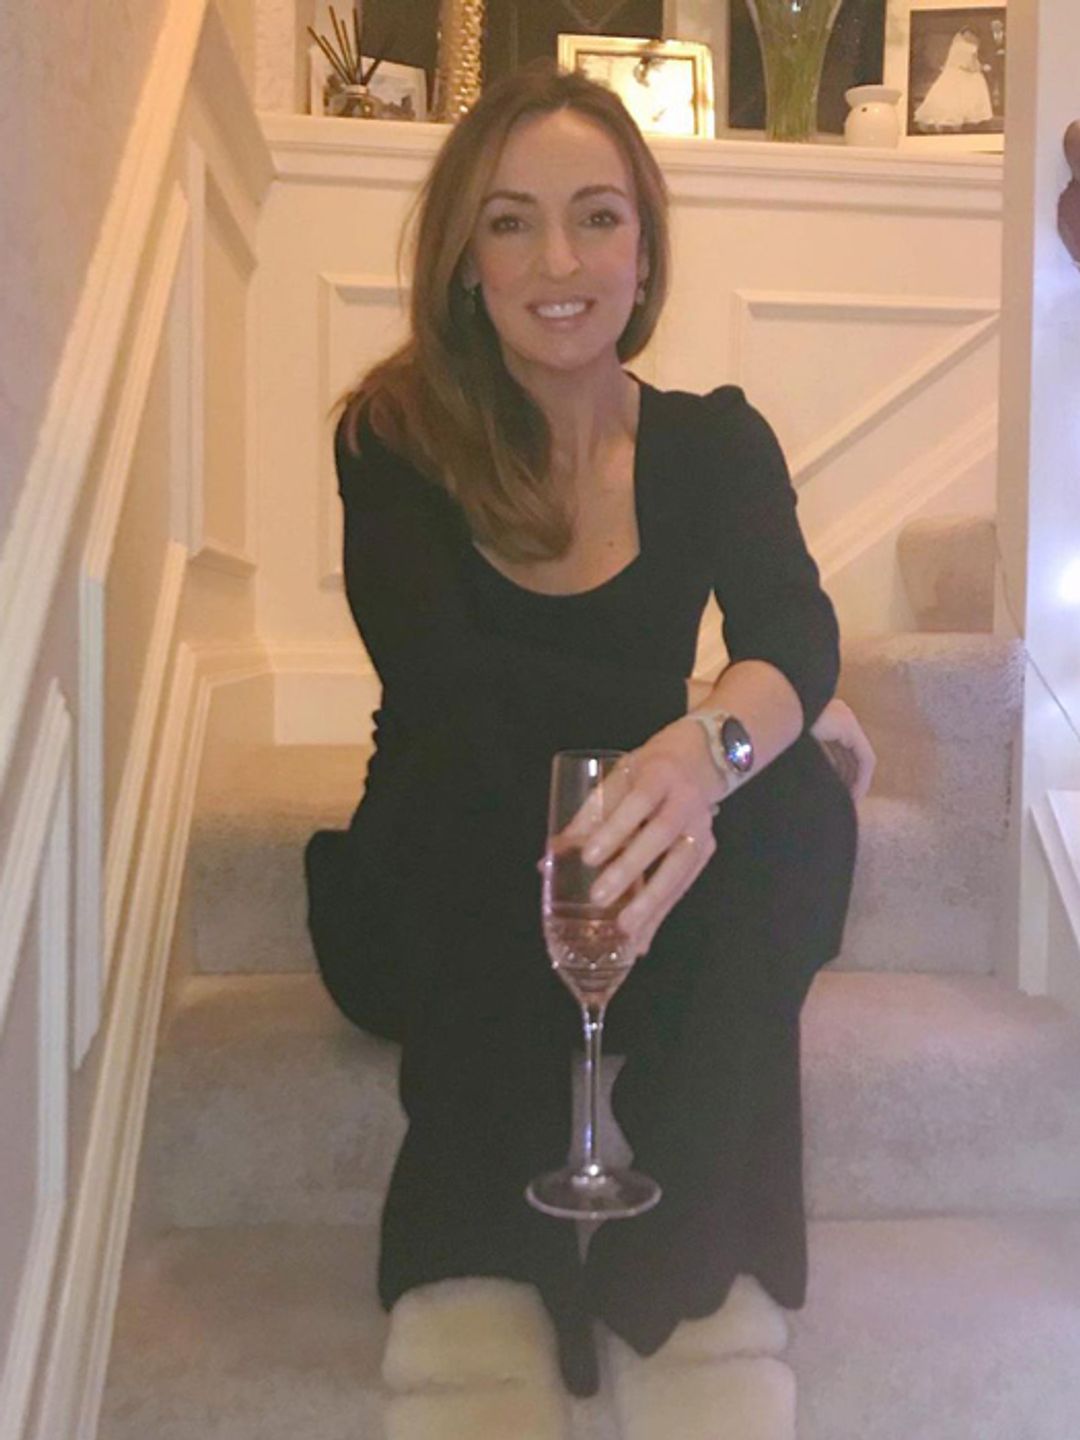 Sally Nugent has a framed wedding photo on her windowsill at home